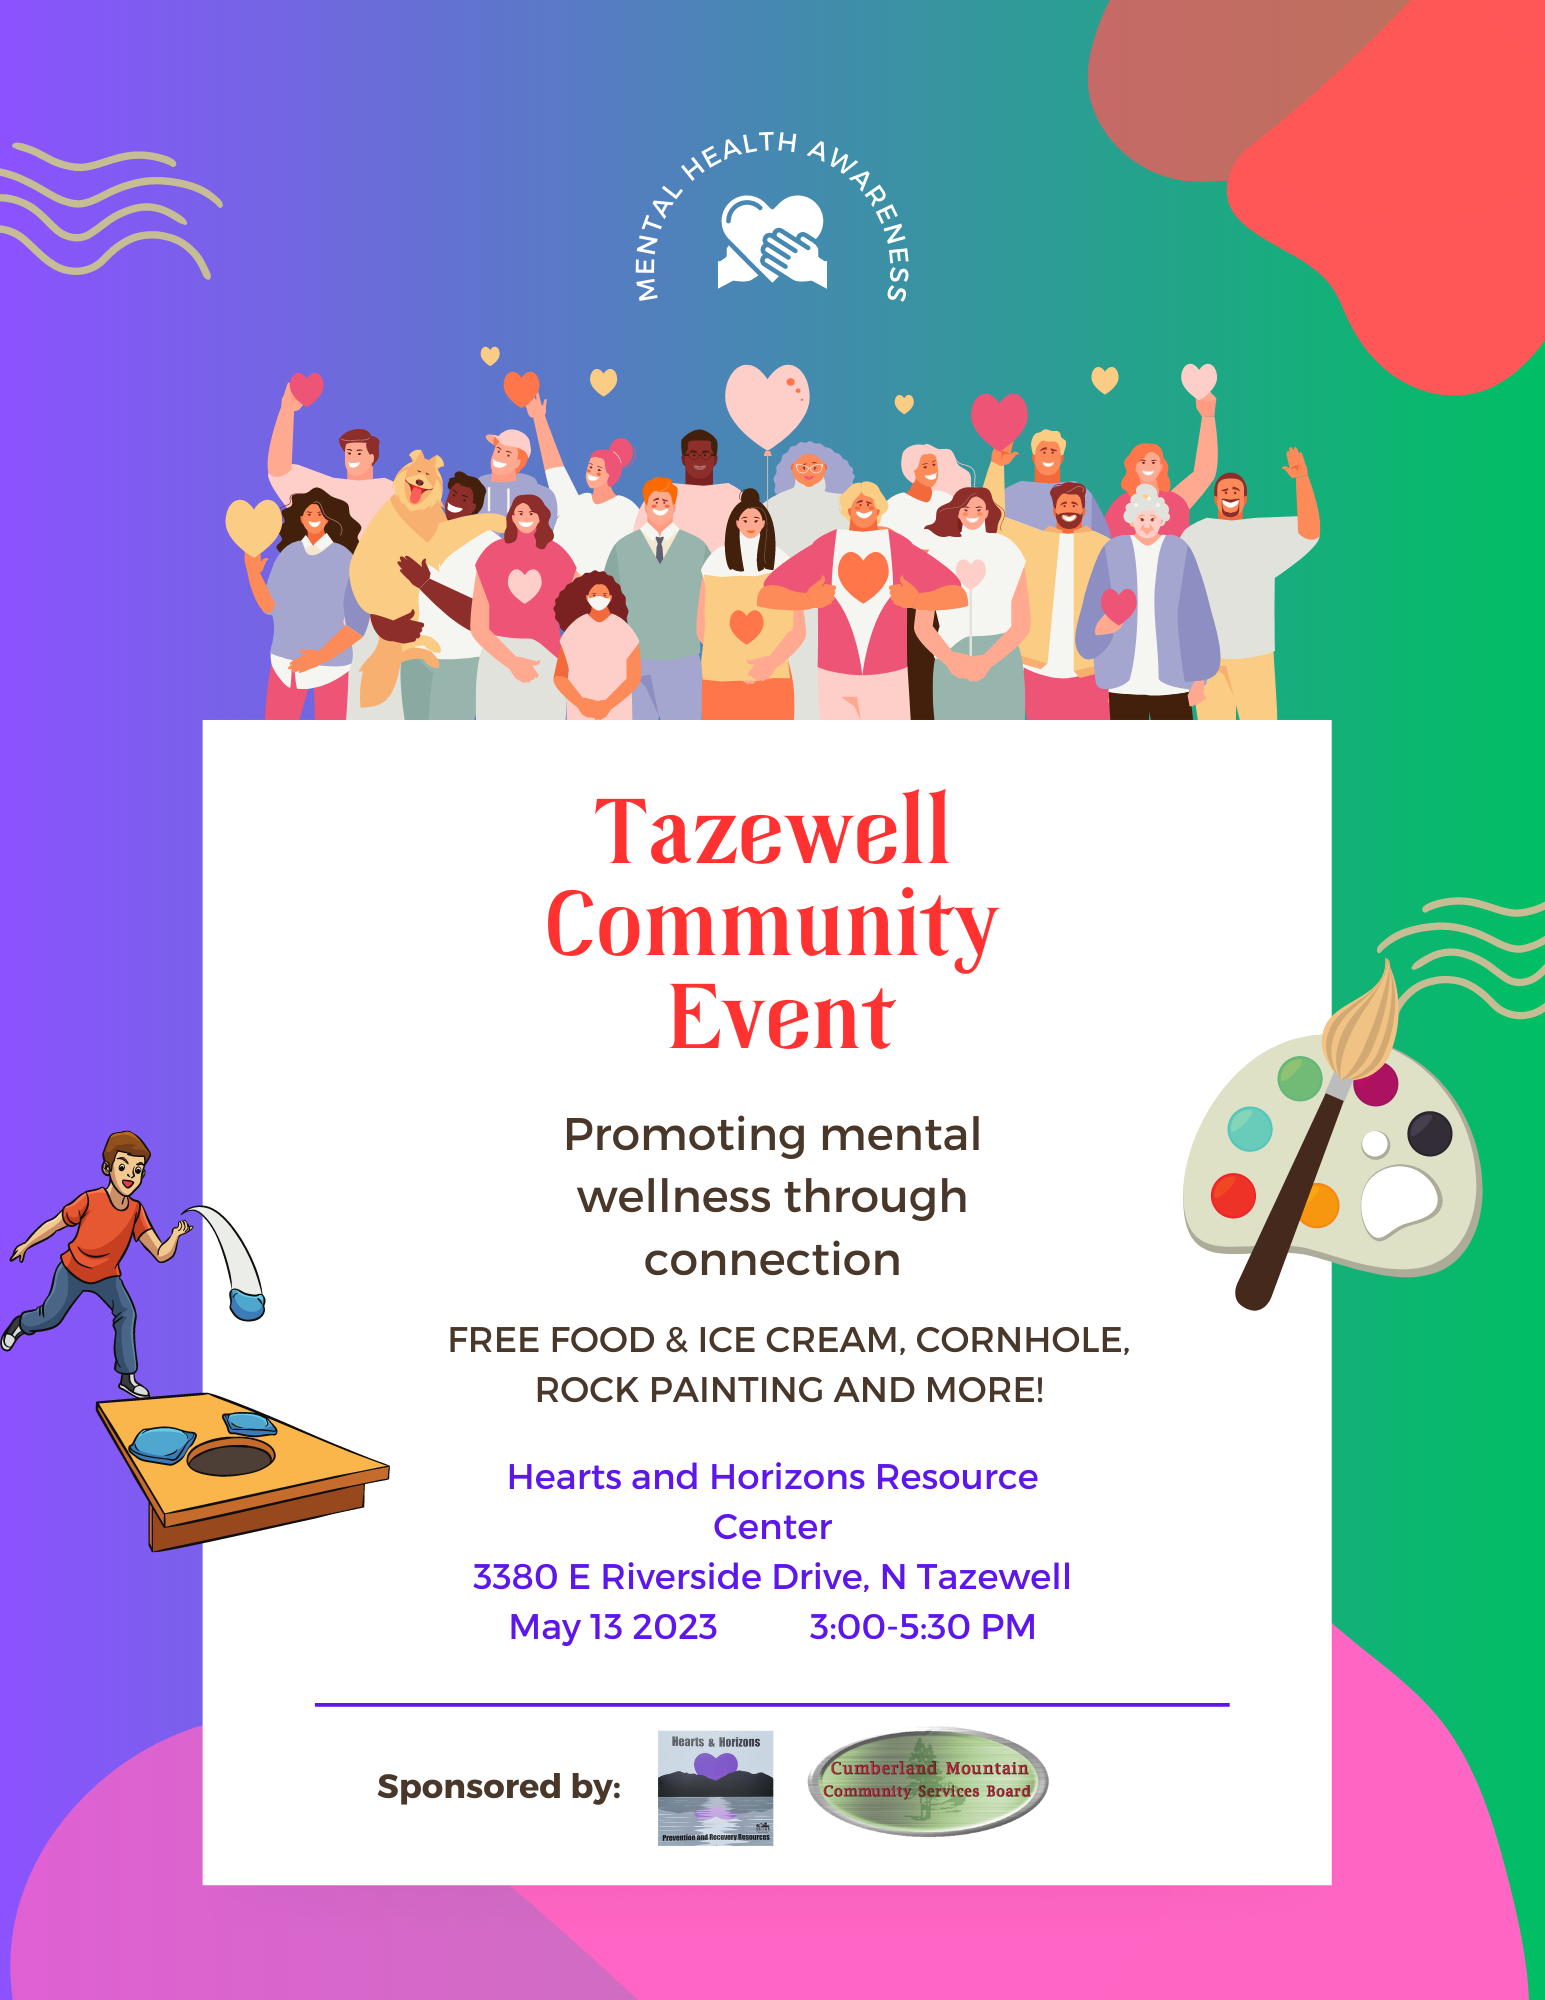 Tazewell Community Event